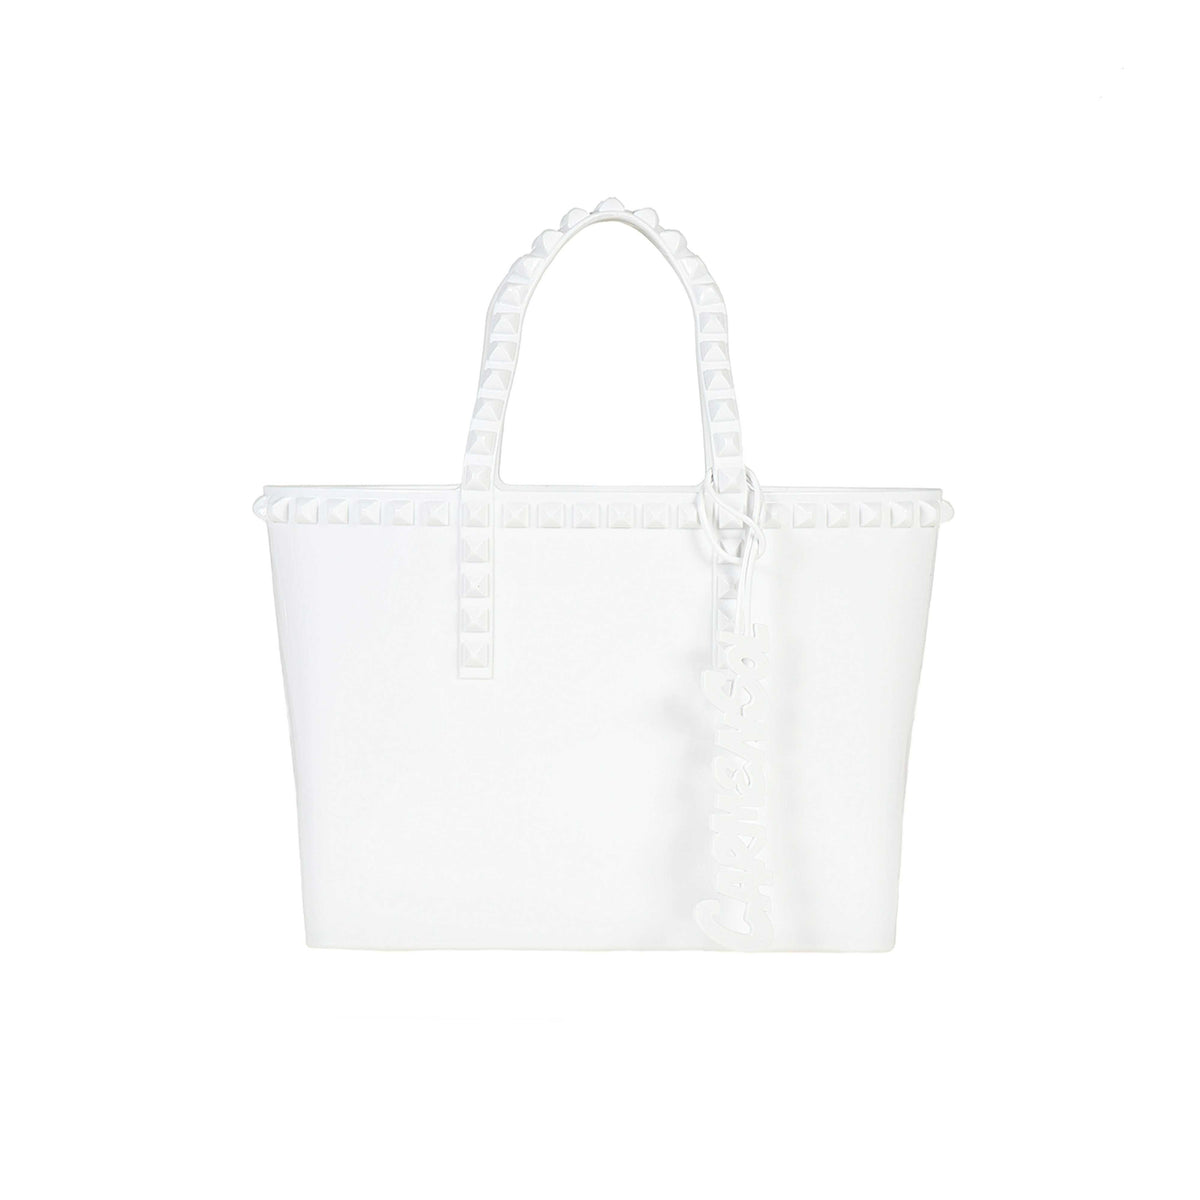 Made in Italy jelly bags in color white with Carmen Sol charm